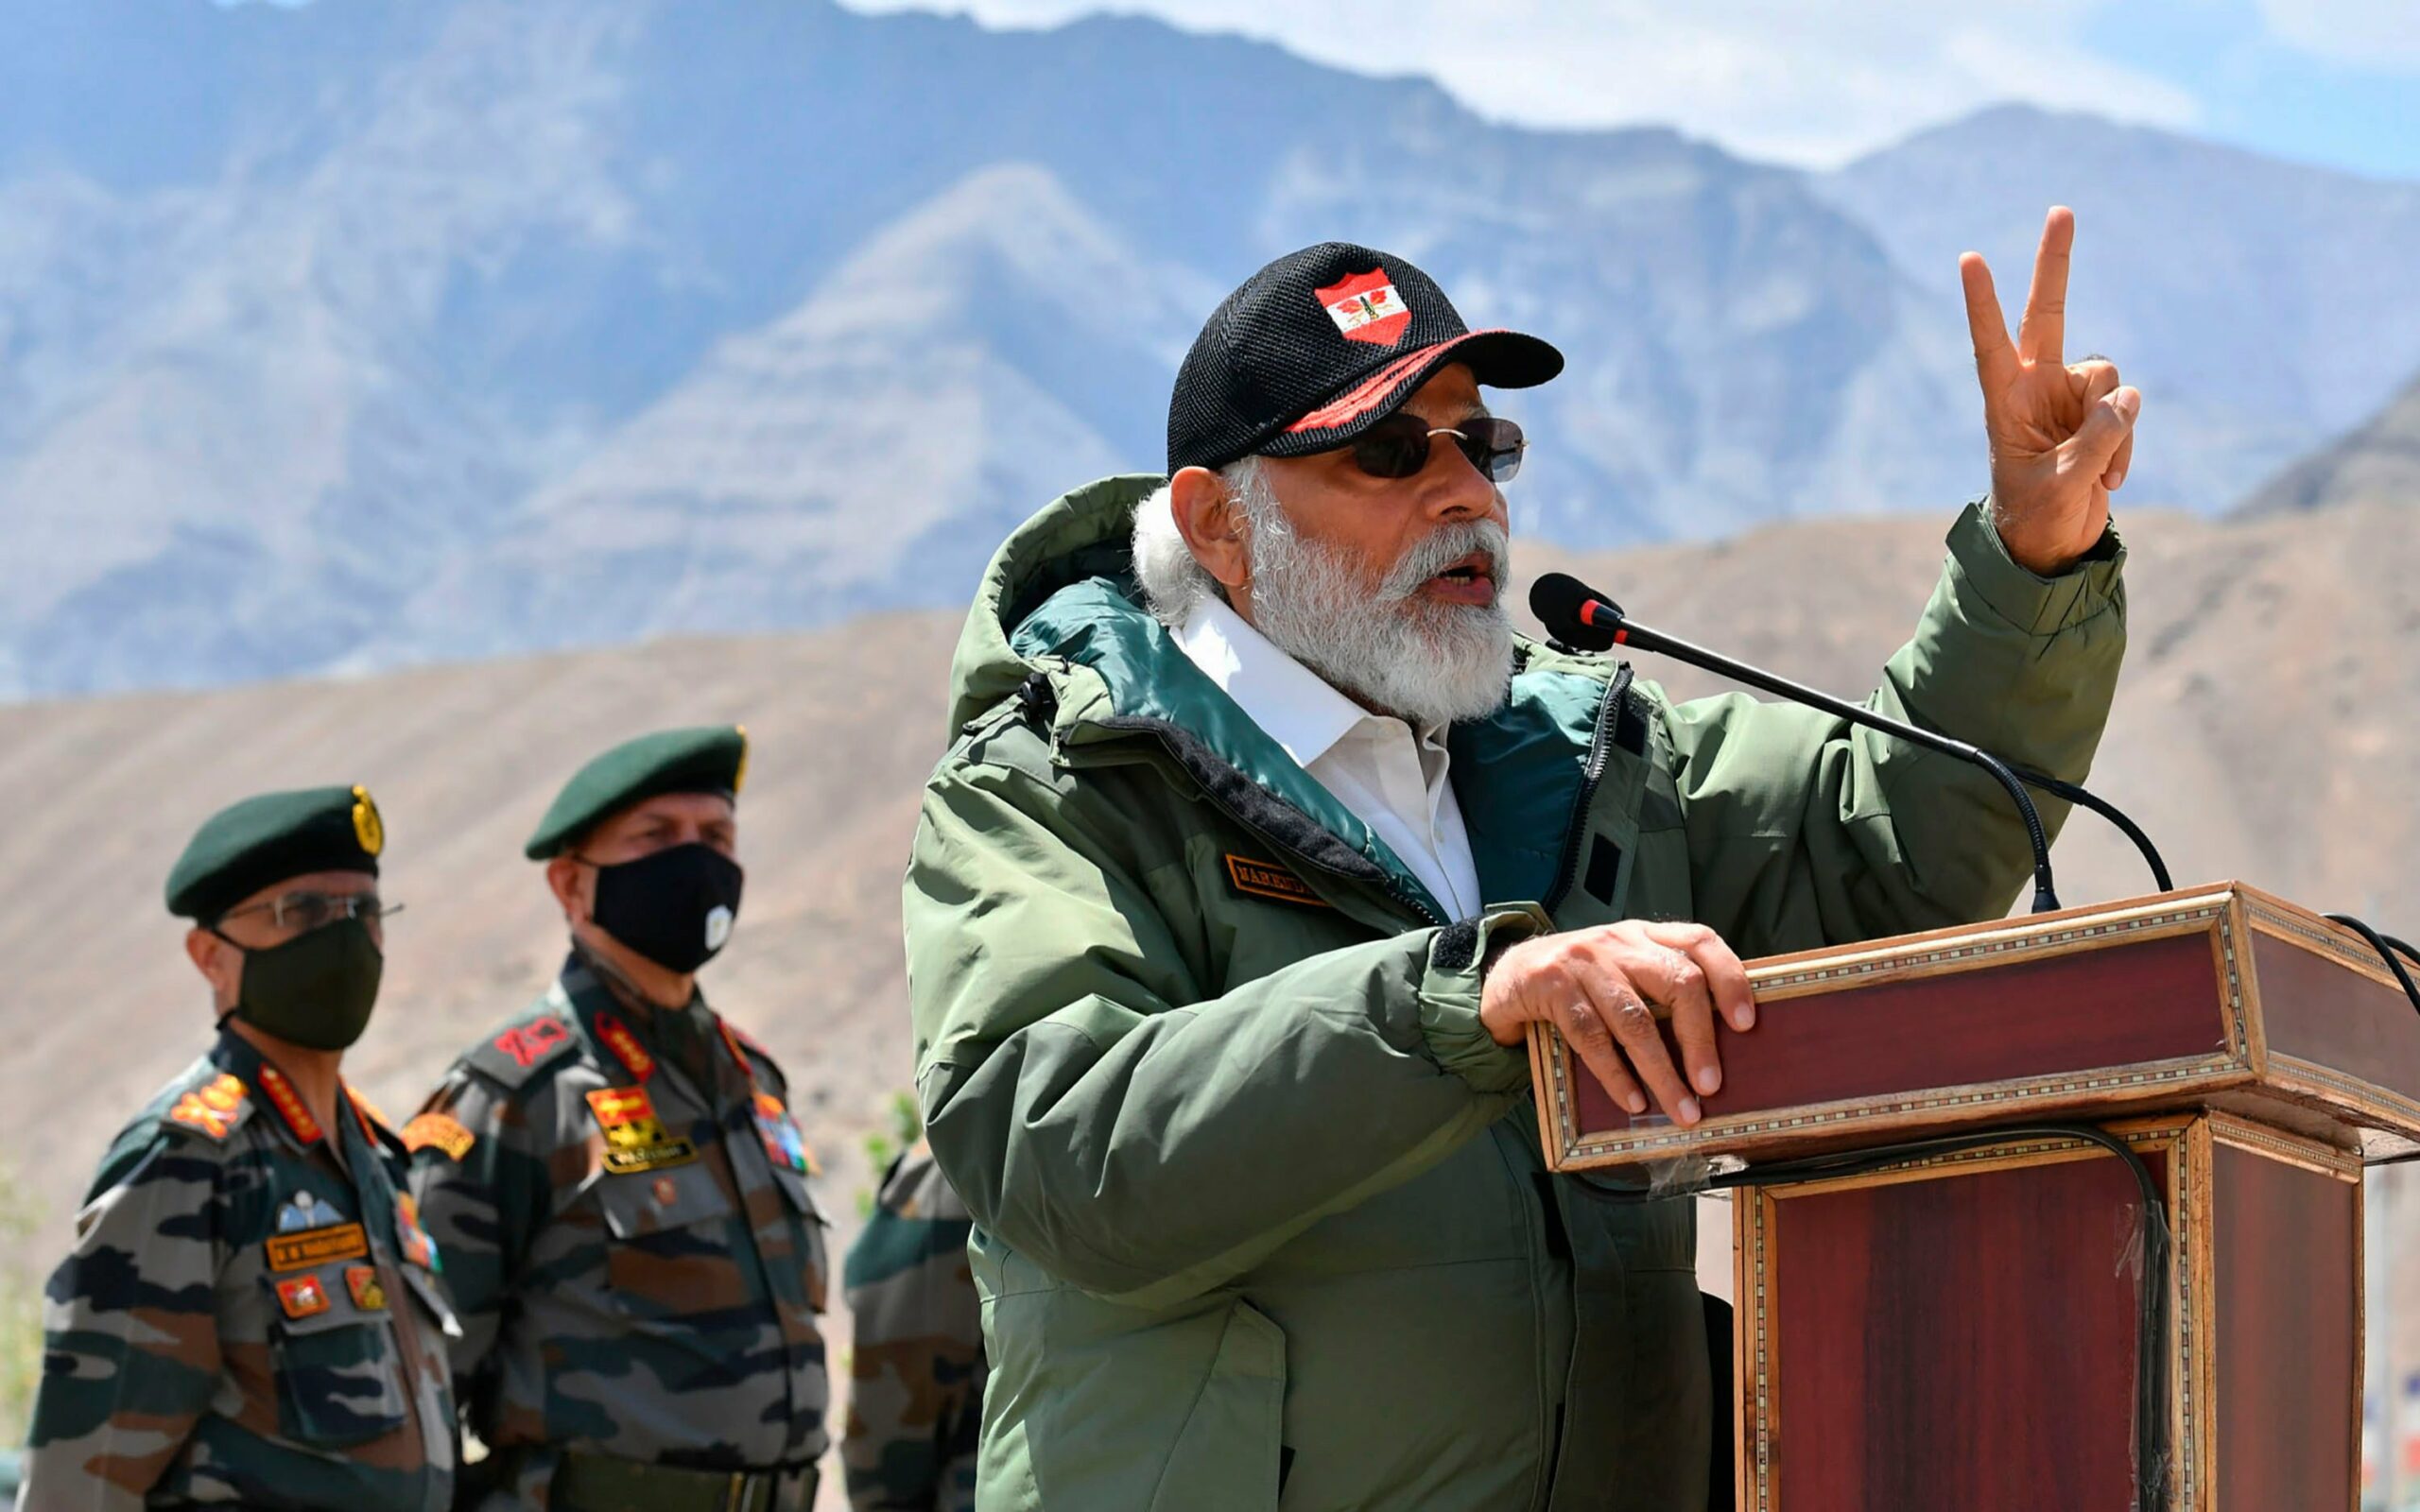 PM Modi in the Indian Army Uniform is Punishable Offence: UP District Court